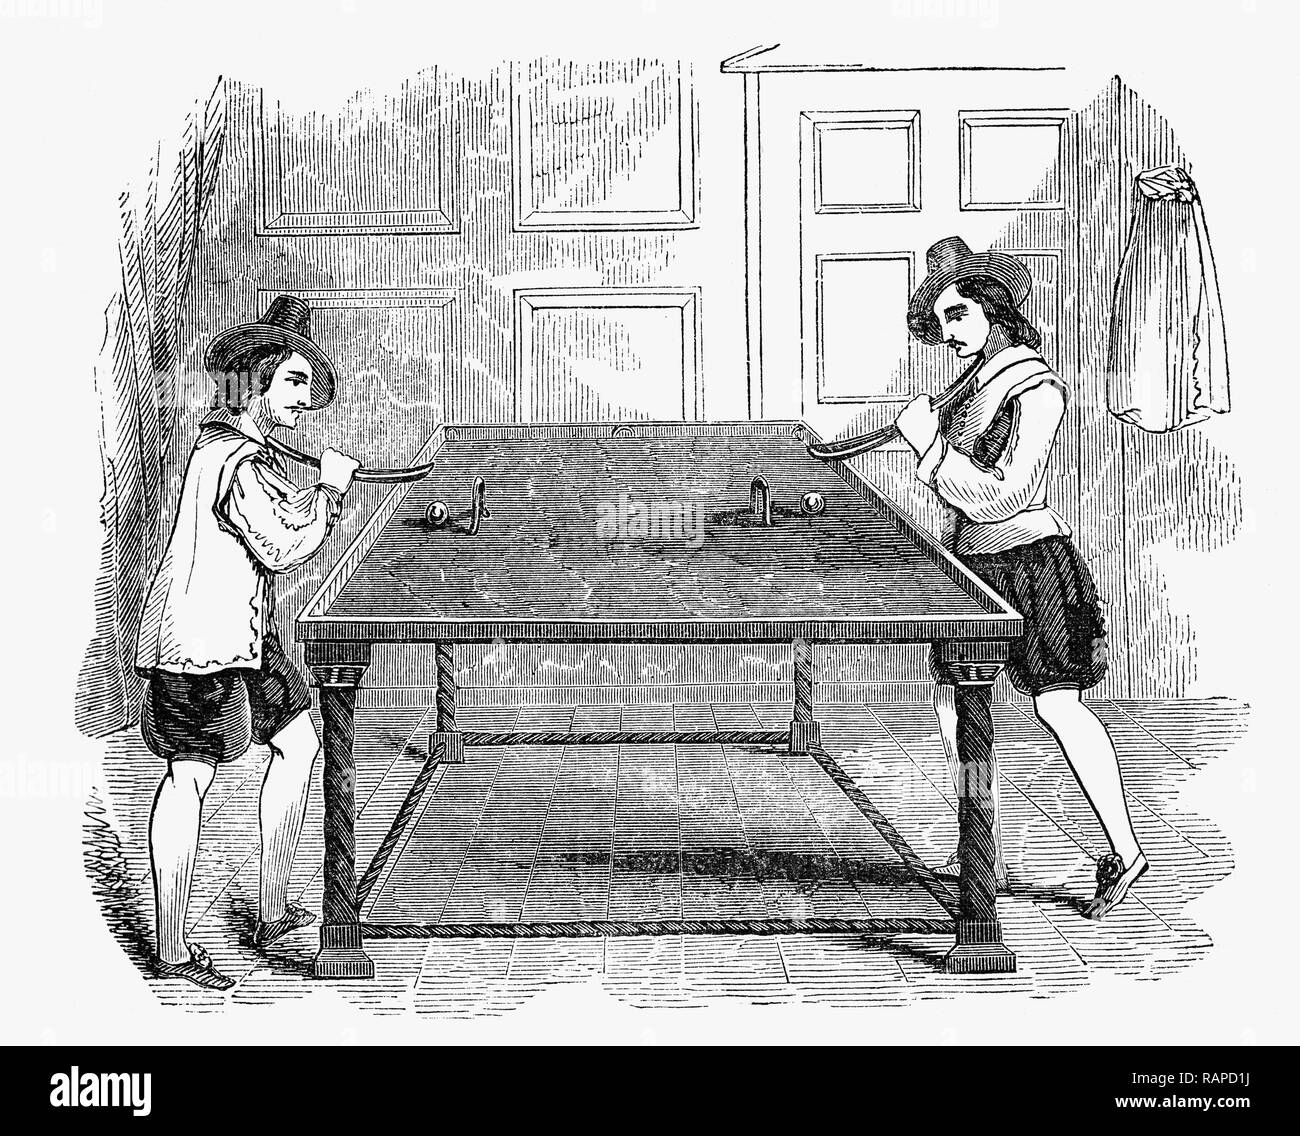 During the 17th Century  billiards became very popular, both among ordinary citizens in public places and among the nobility who tended to own their own private tables. King James I (1603-1625) owned a billiard table.  At that time, only two balls used, one belonging to each of two players. Rather than cues, players used a 'mace', essentially a crooked stick with a sizeable head. Stock Photo